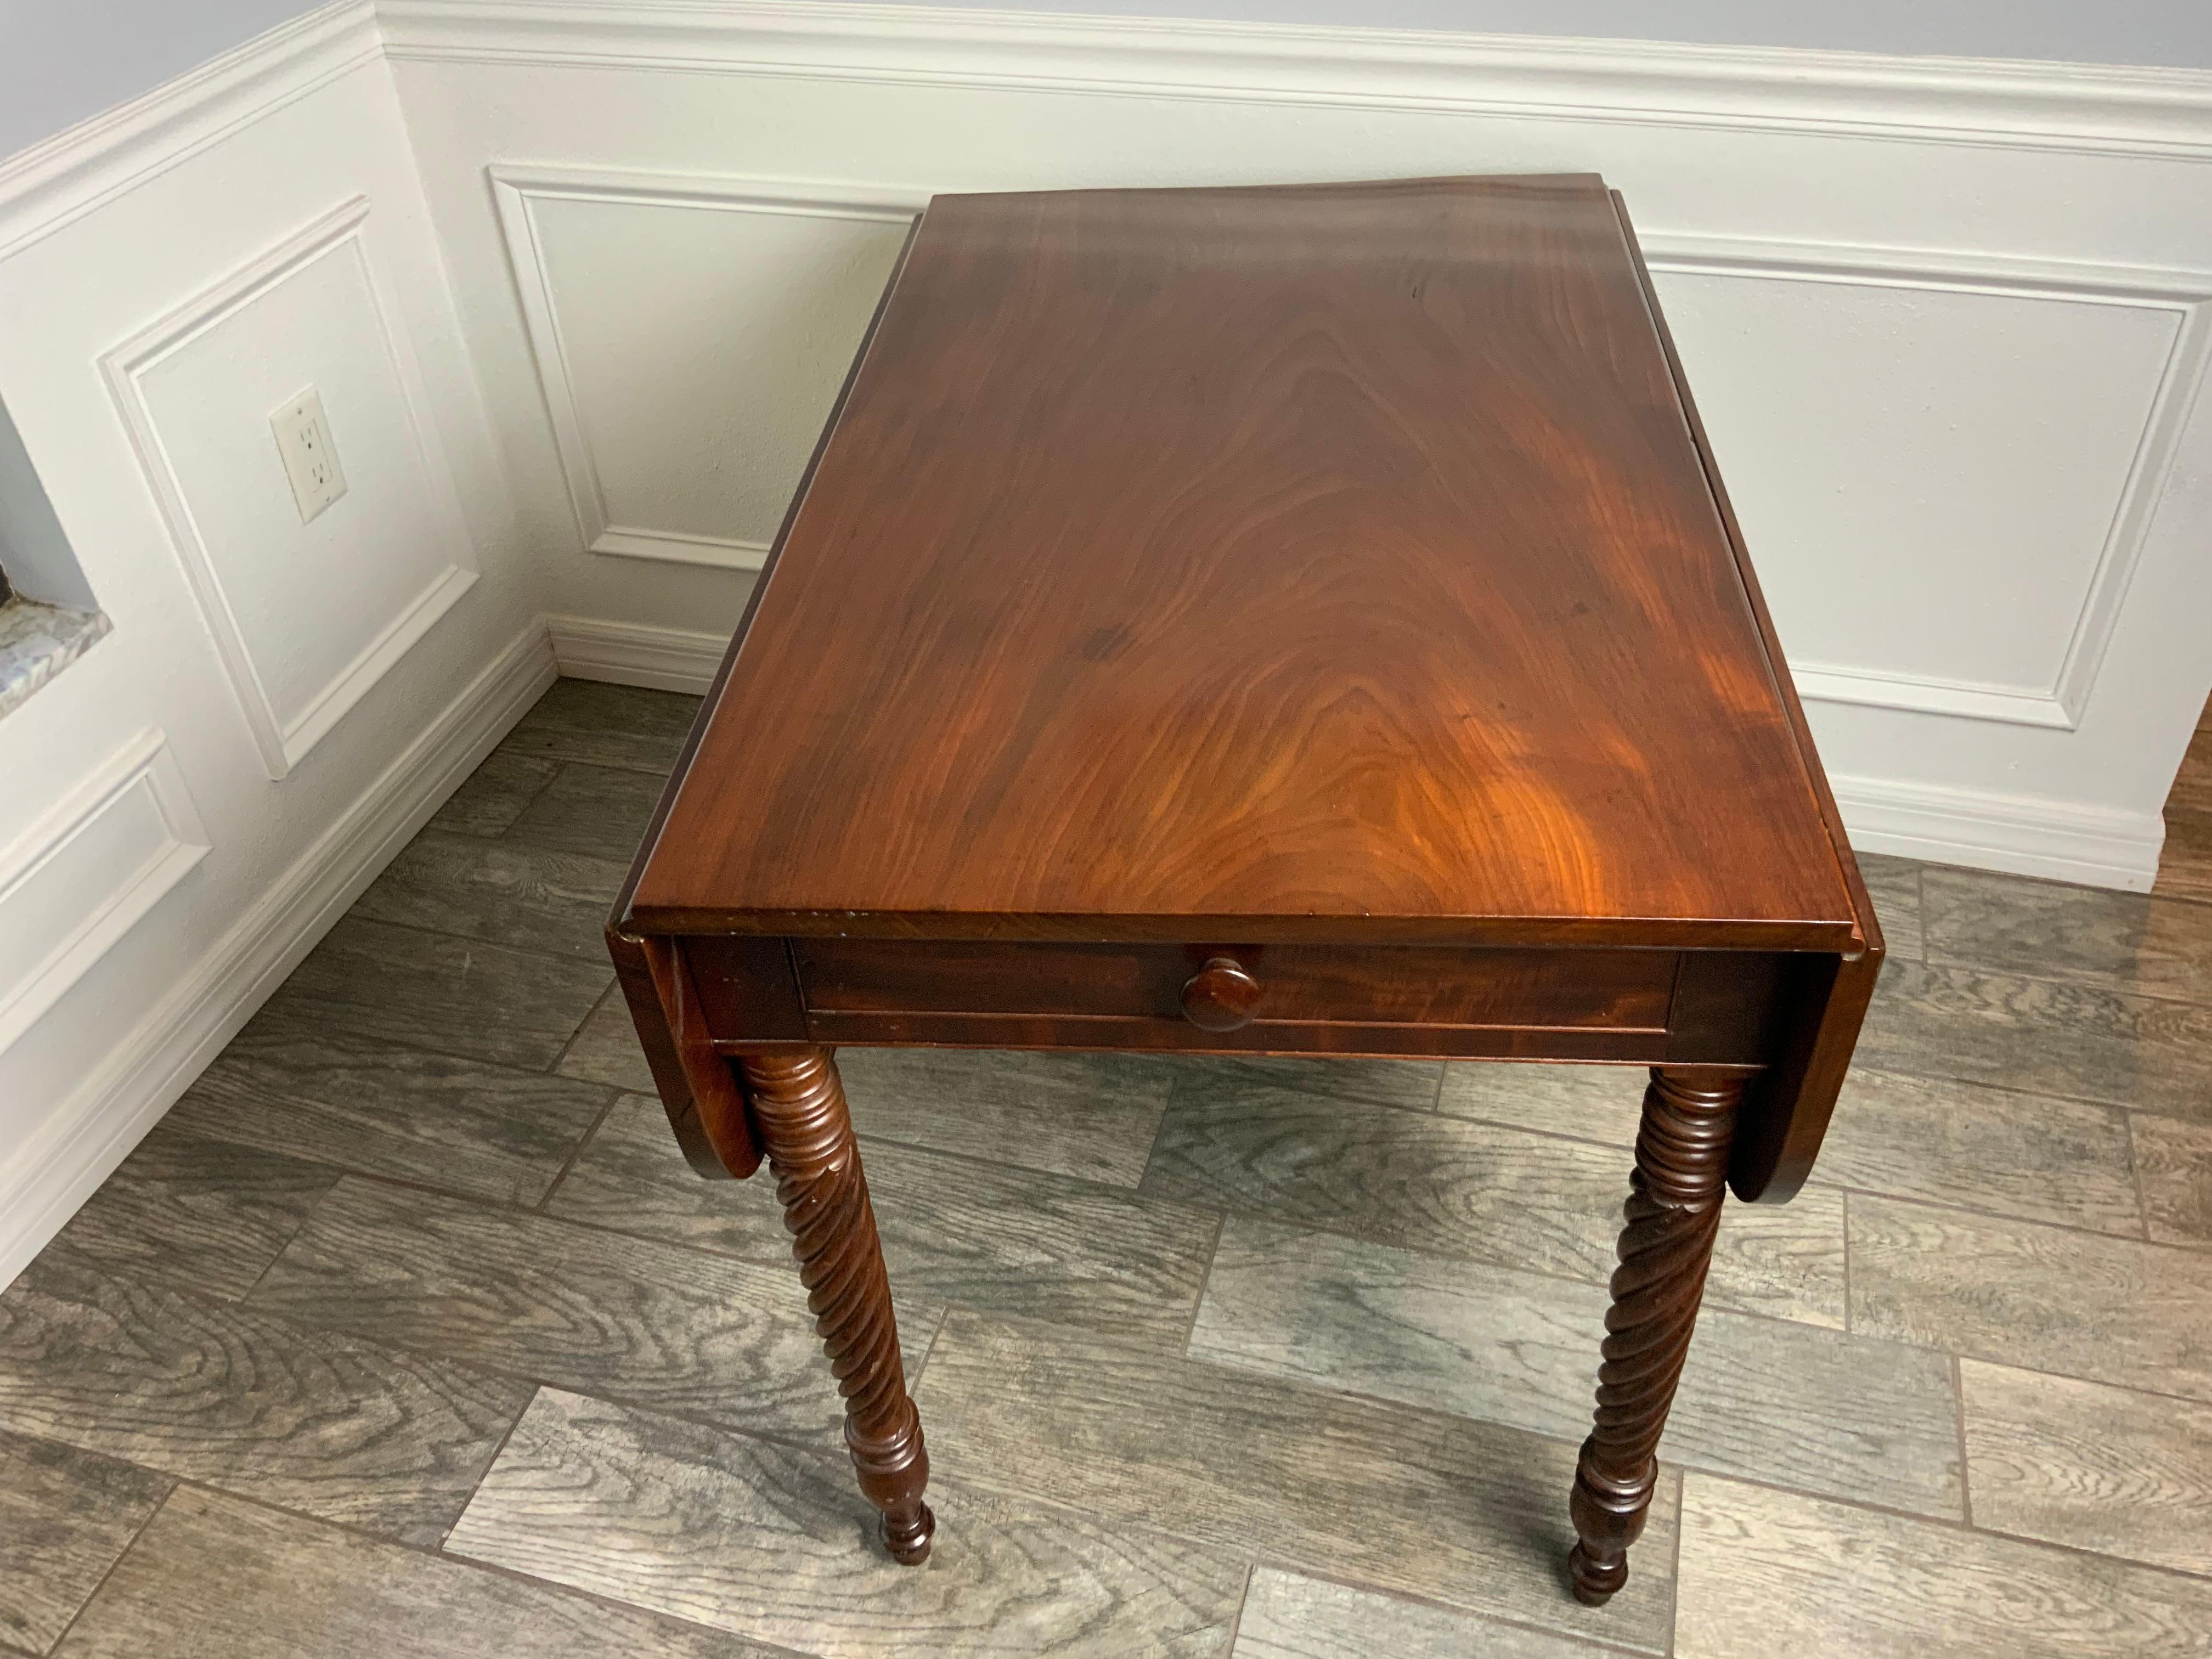 Exceptionally clean American Sheraton drop leaf table with rope twist carvings ending in nicely turned legs.  One board solid top and leaves that are also grain matched to the top.  Solid curly Maple swing out hinge supports on a white Pine apron.